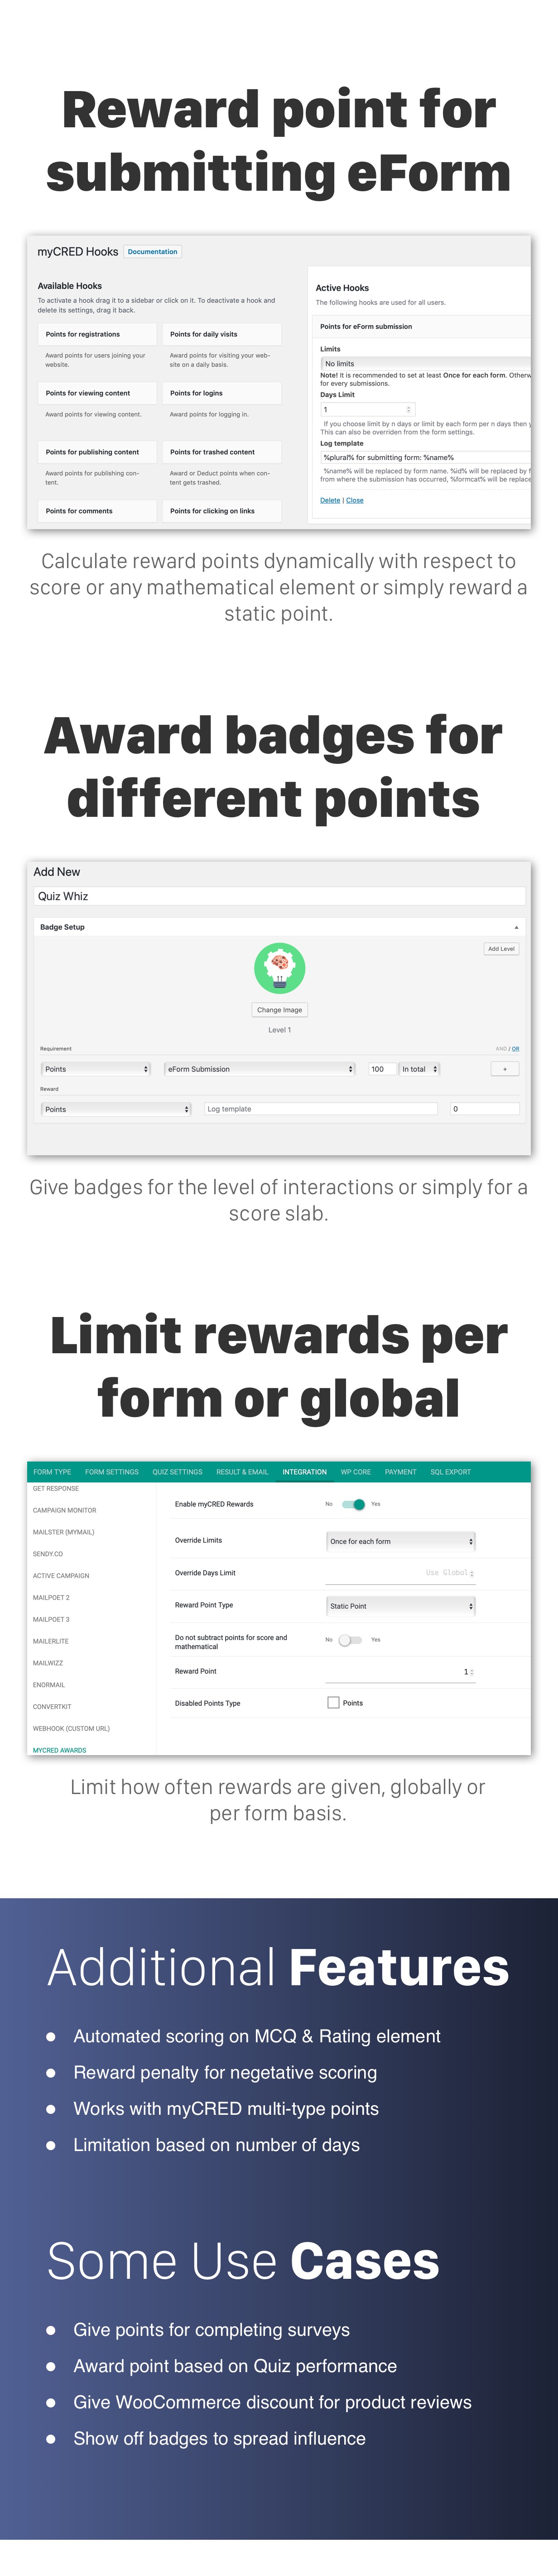 eForm myCRED product features